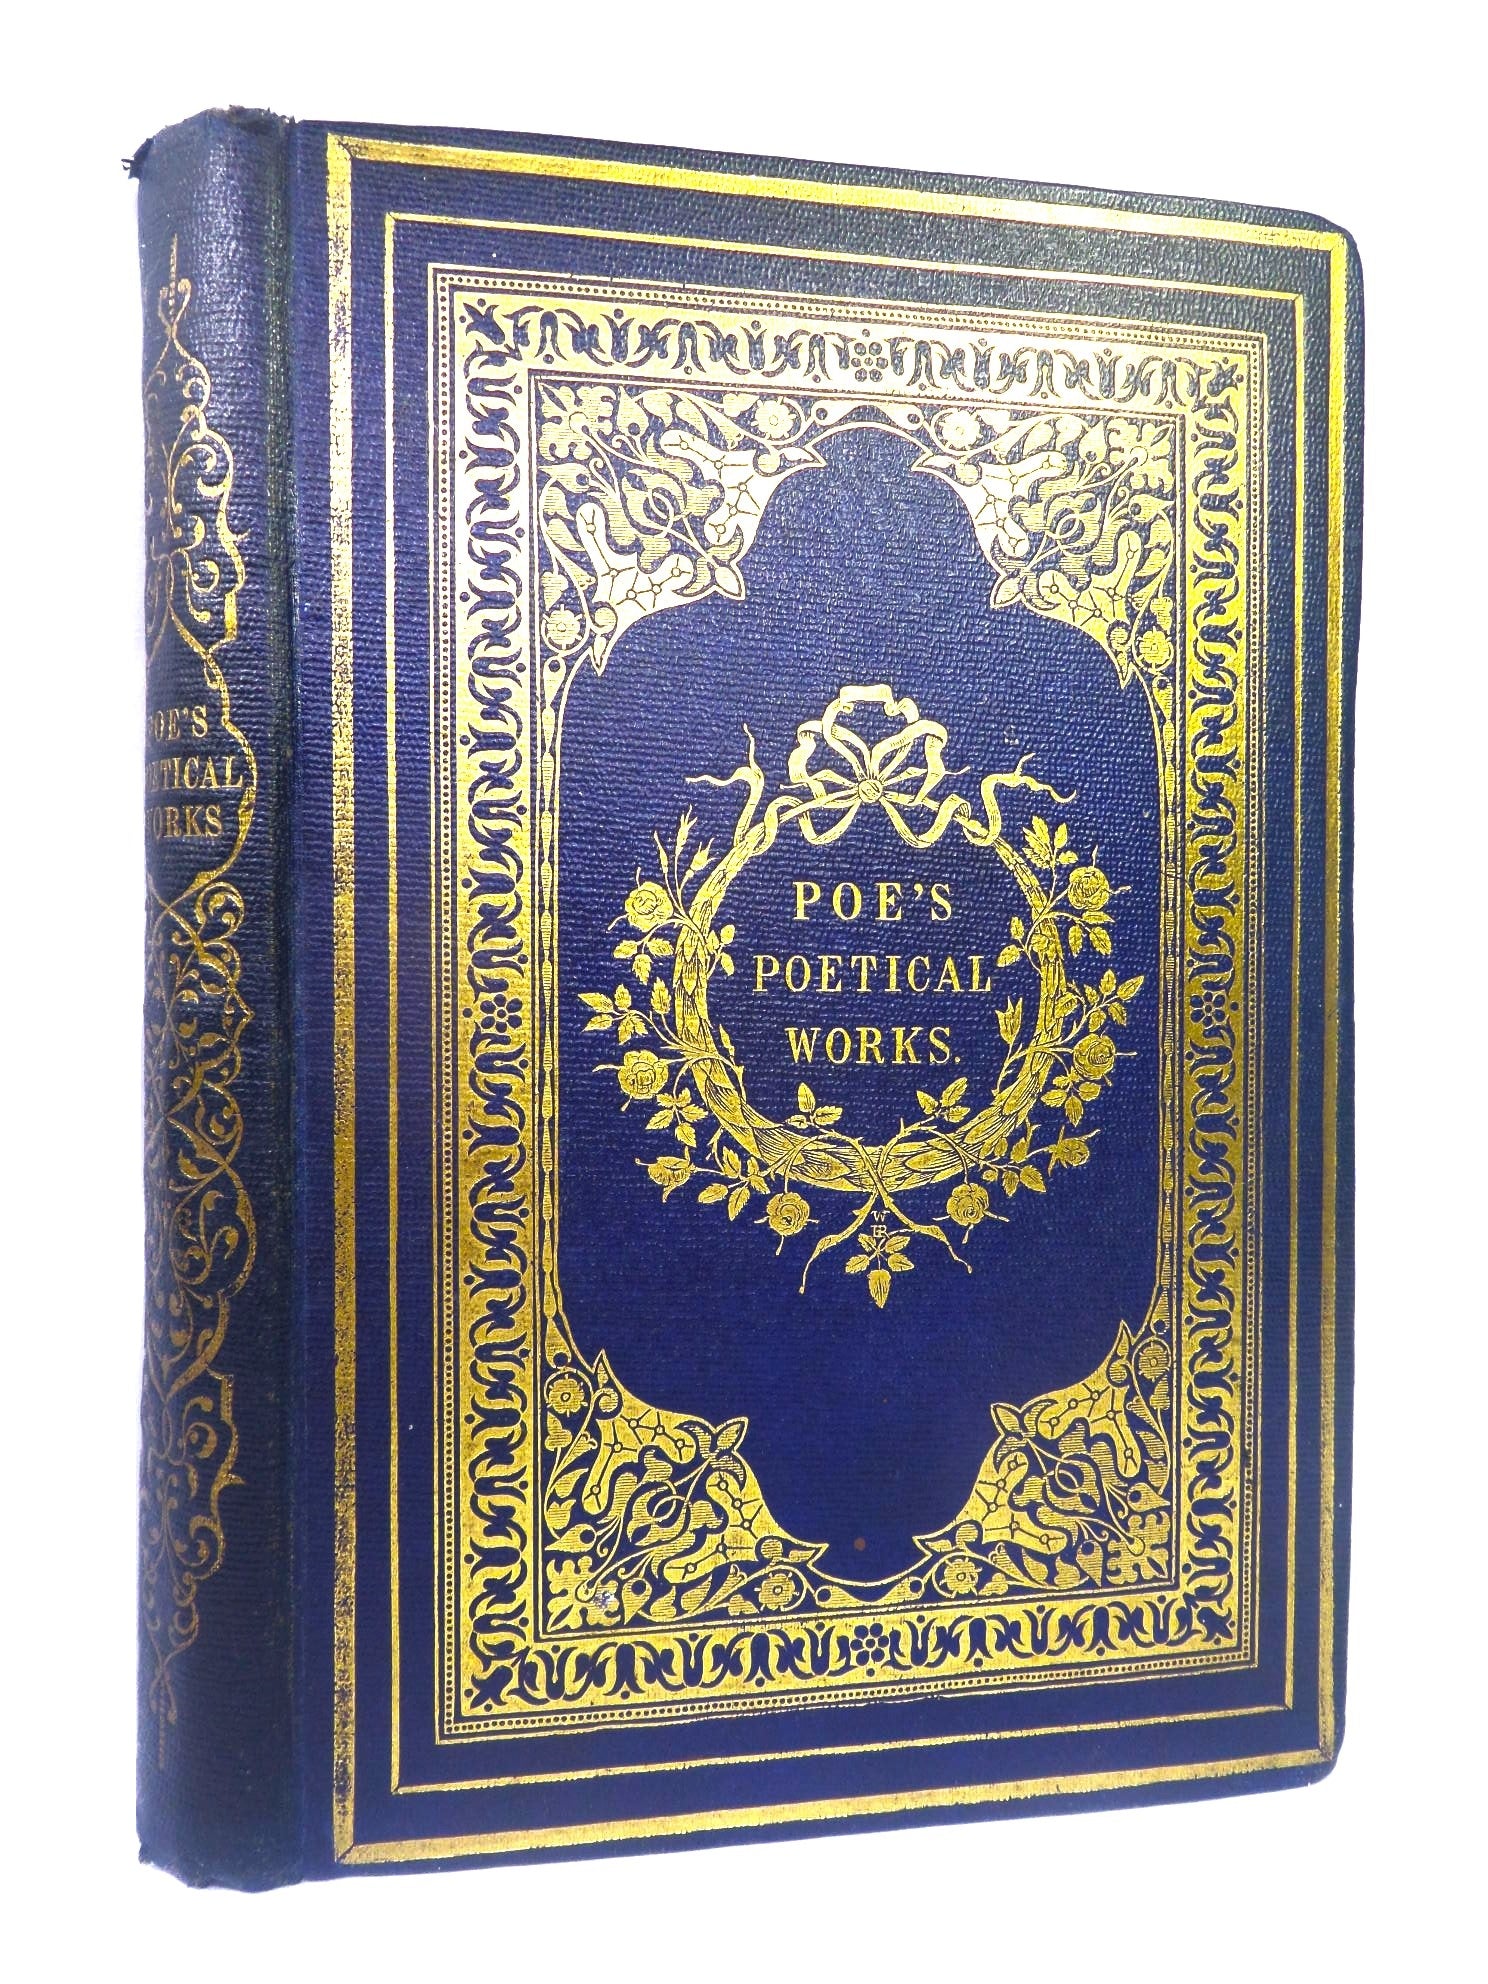 THE POETICAL WORKS OF EDGAR ALLAN POE 1852 COMPLETE EDITION, ILLUSTRATED